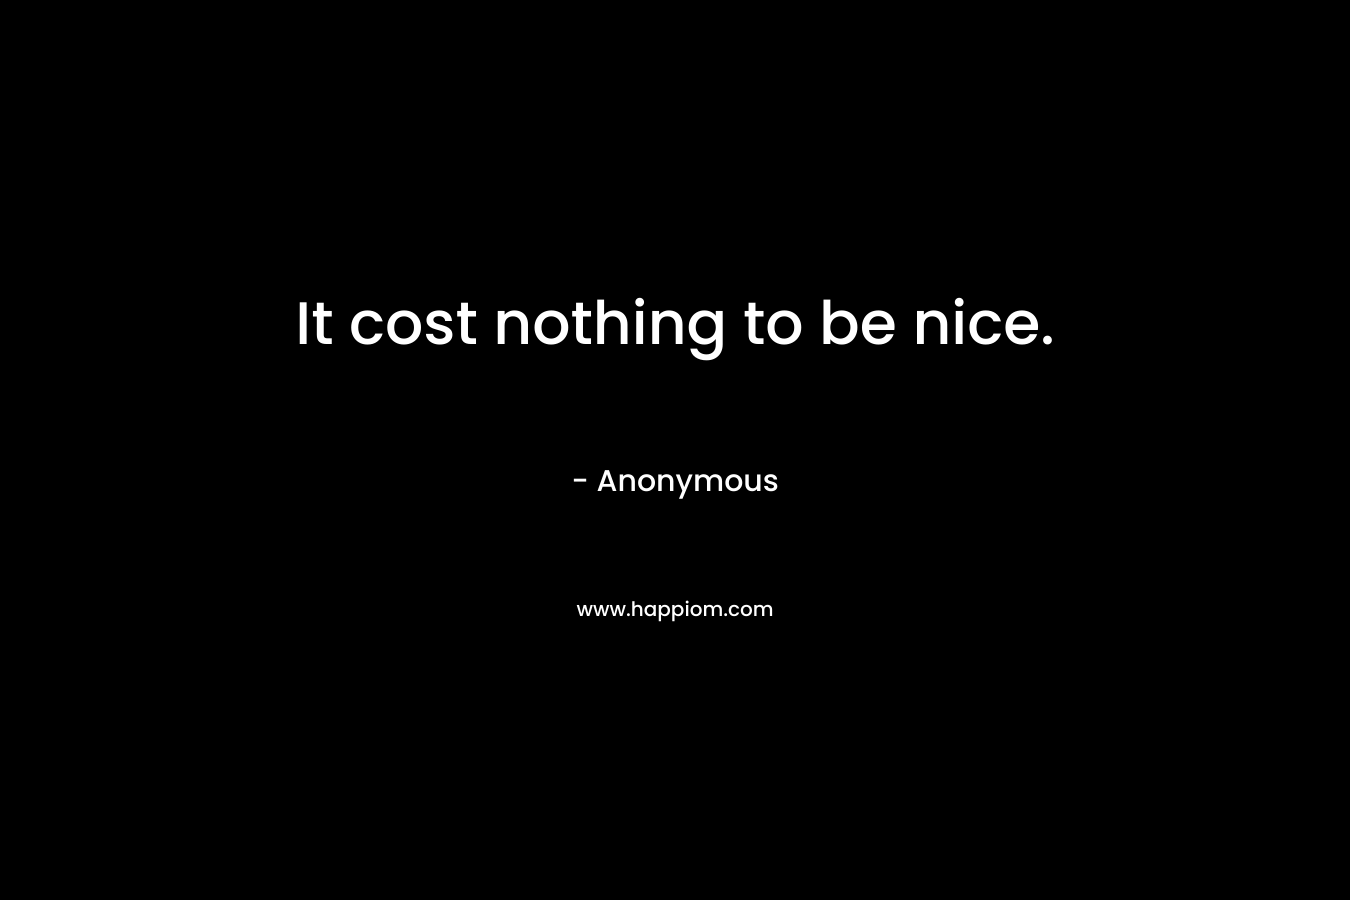 It cost nothing to be nice.